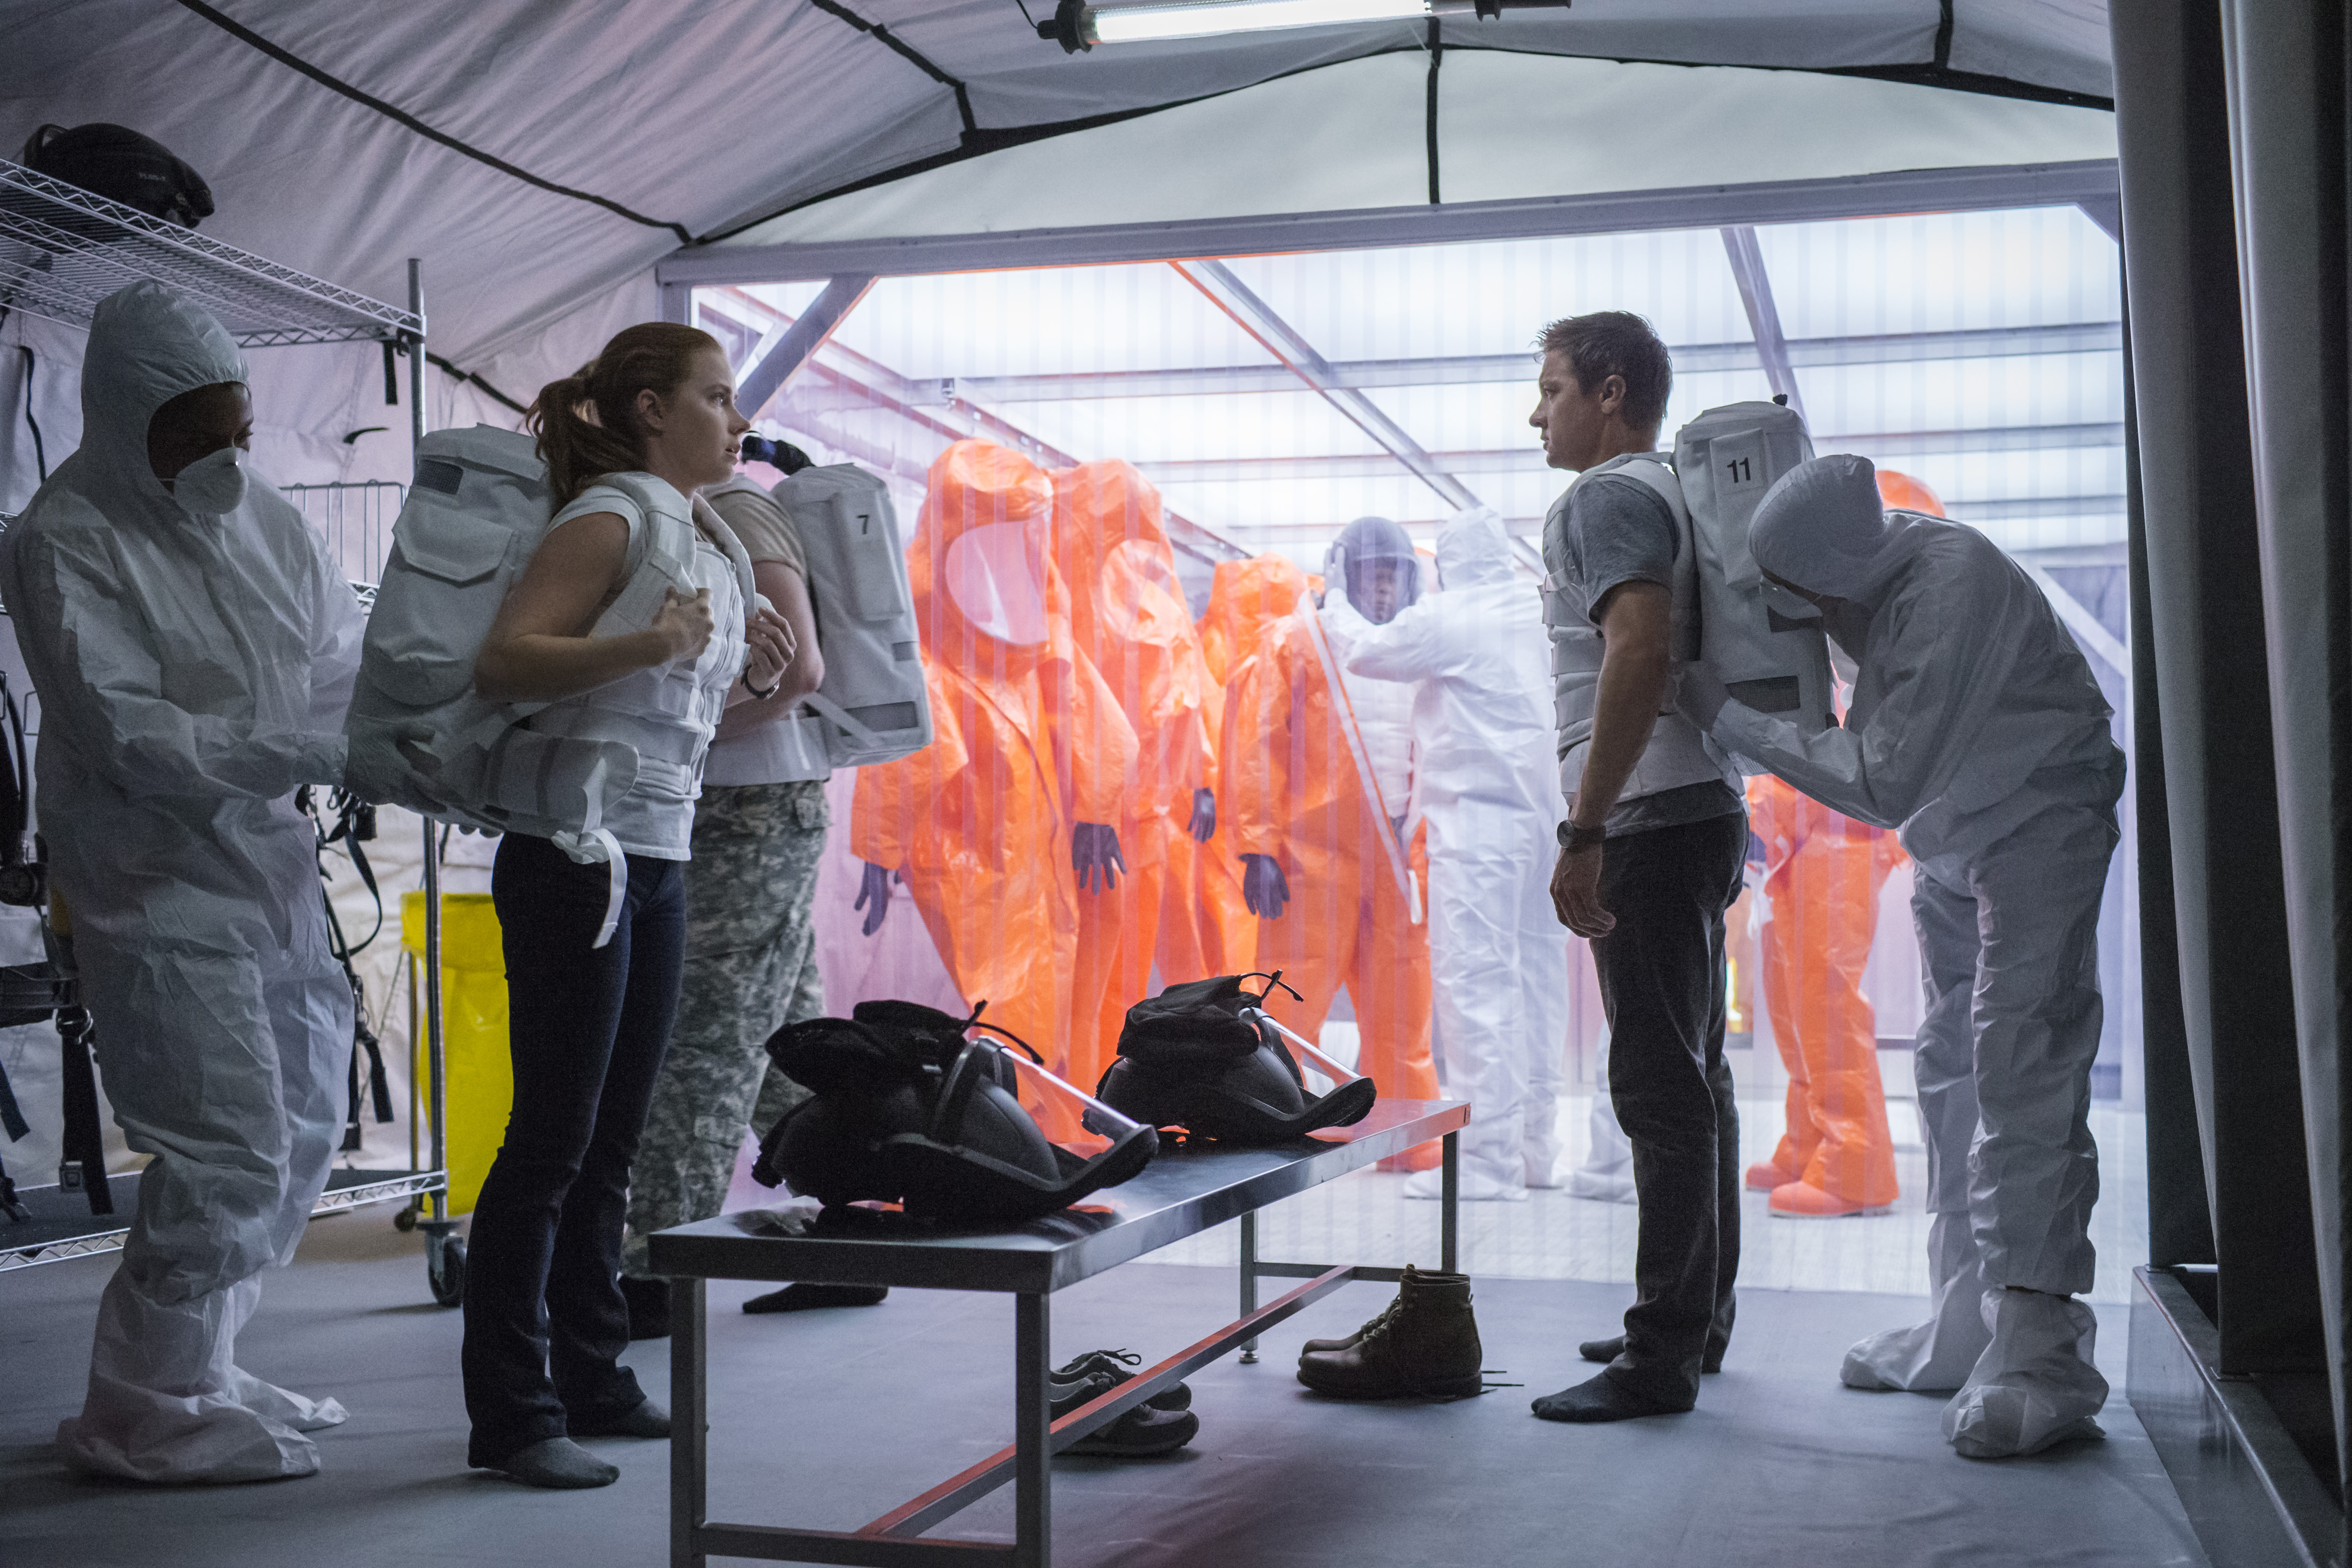 movie, arrival, amy adams, arrival (movie), jeremy renner